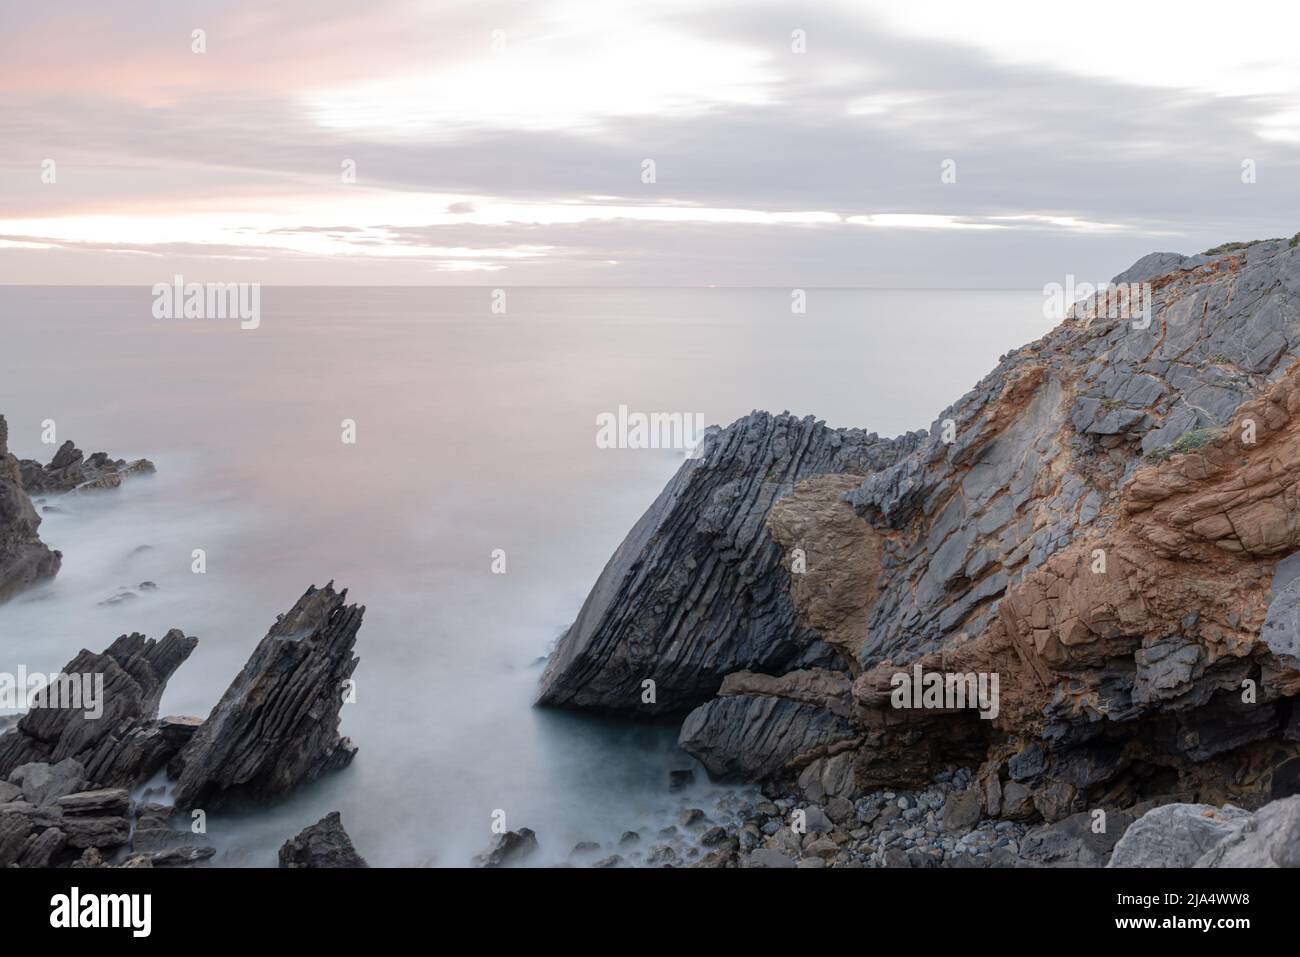 Layered eroded rocks emerging from the Atlantic Ocean at twilight with setting sun at horizon in long exposure landscape in Sintra Portugal Stock Photo